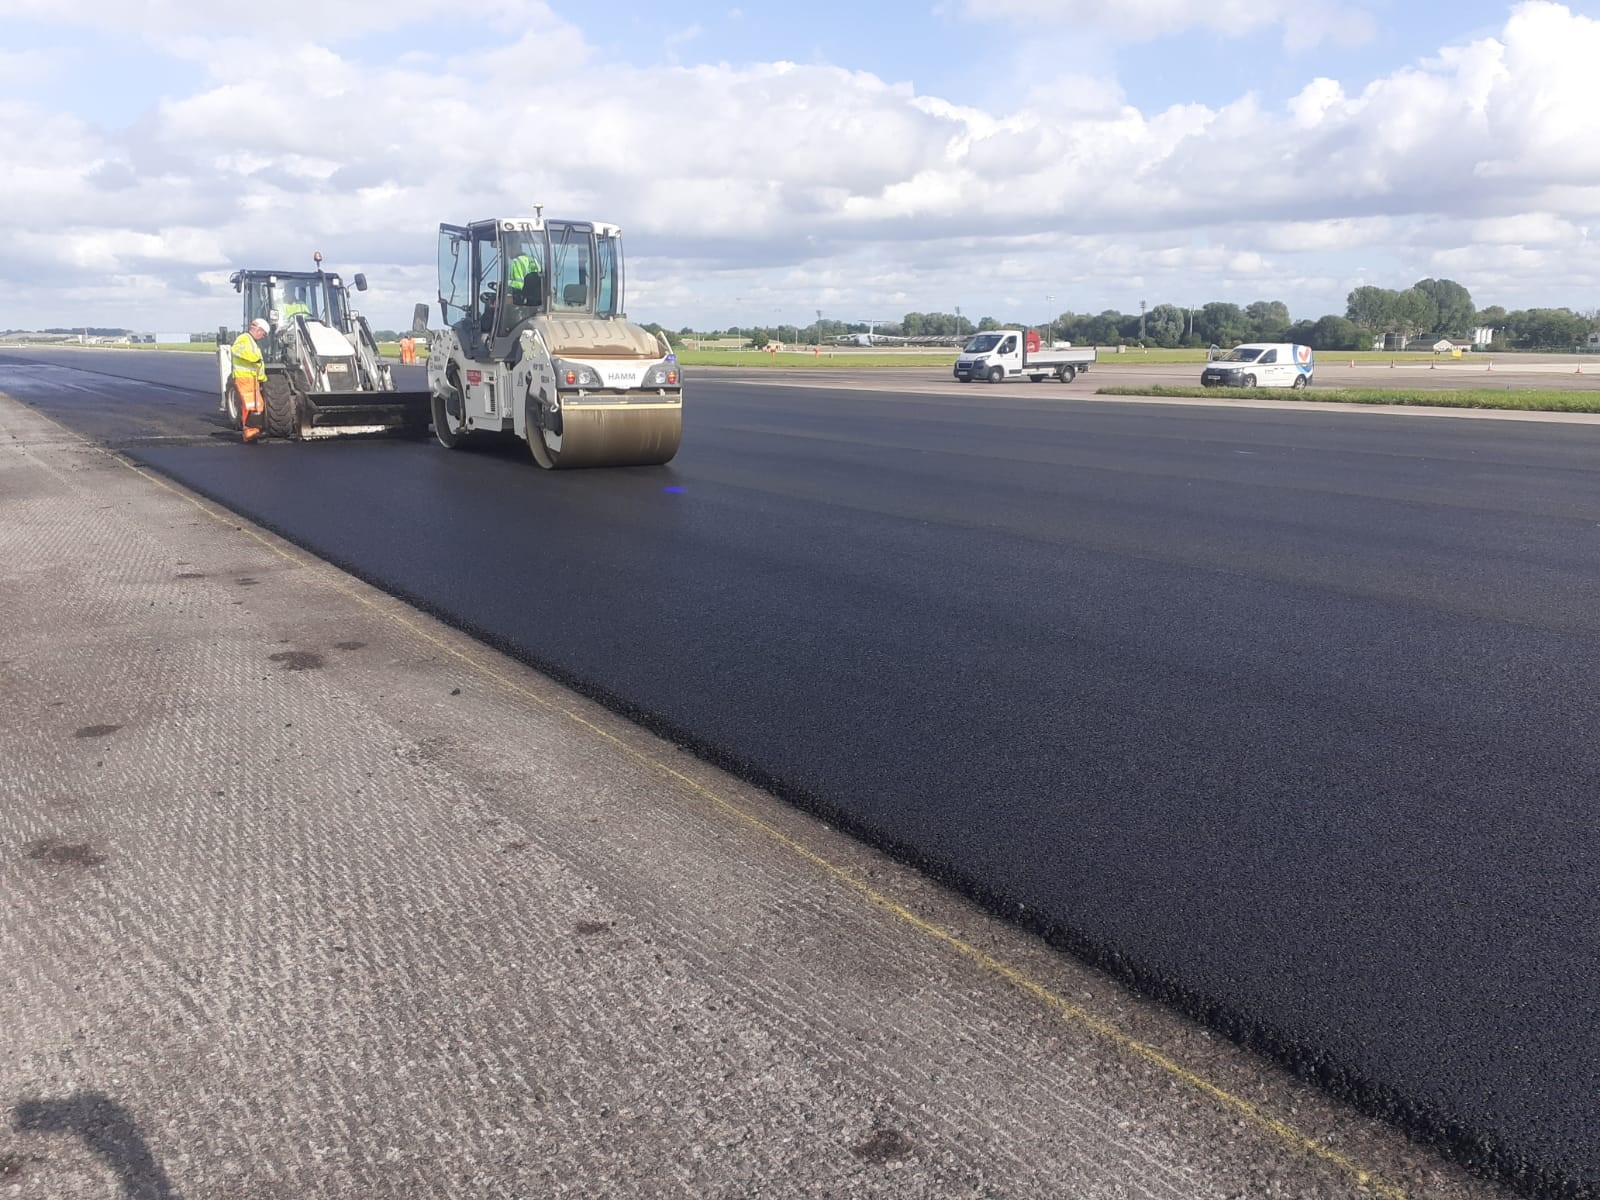 Photo - Vehicles and operators carrying out maintenance to the runway at RAF Brize Norton